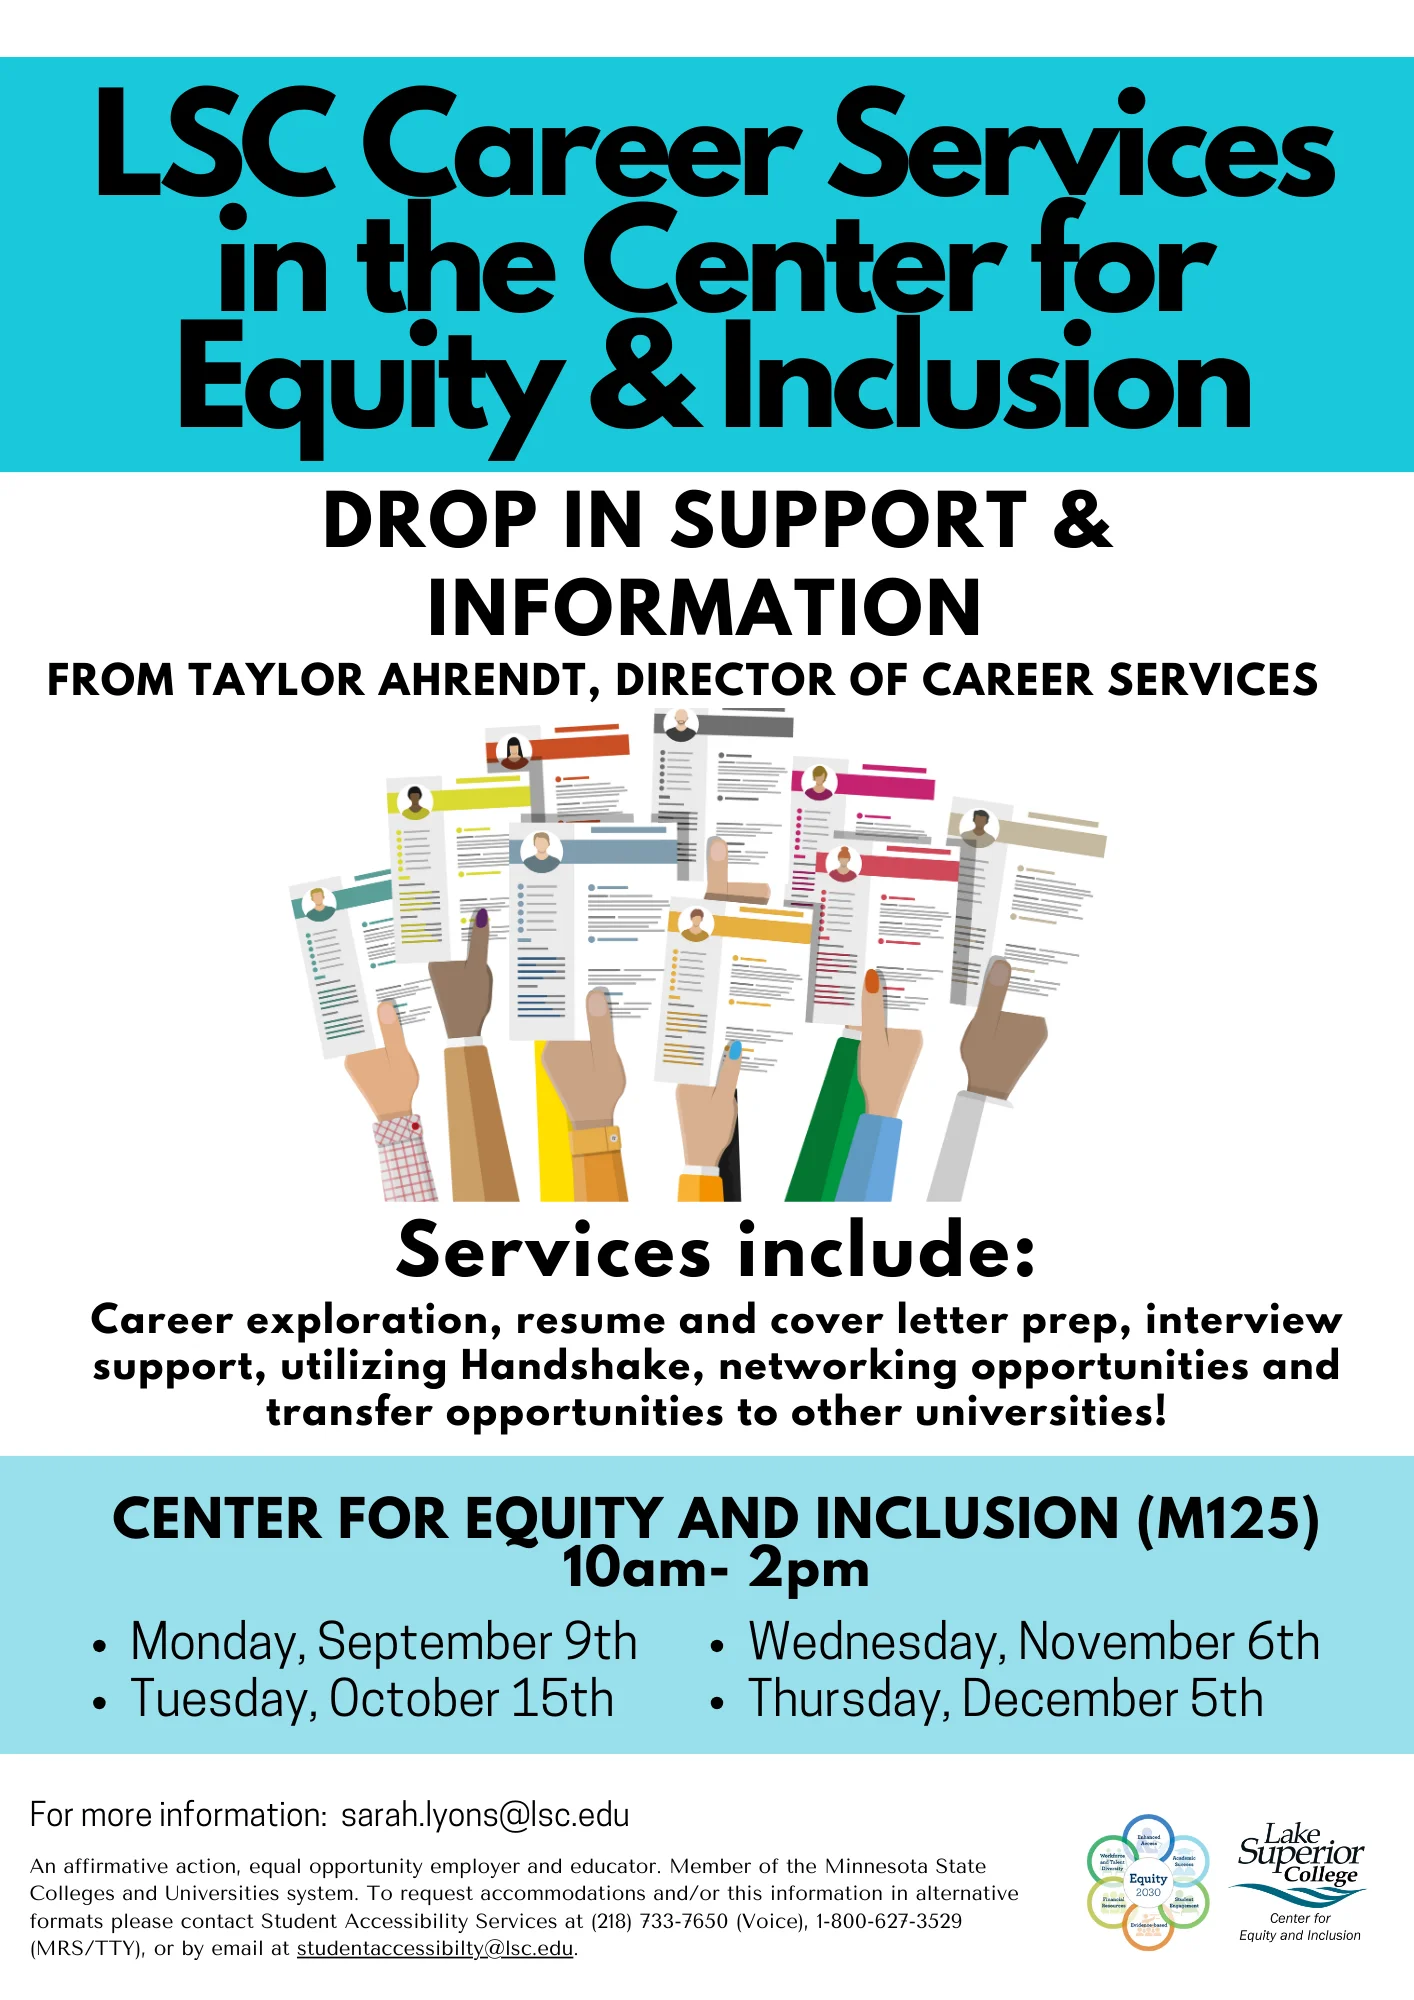 LSC Career Services in the Center for Equity & Inclusion